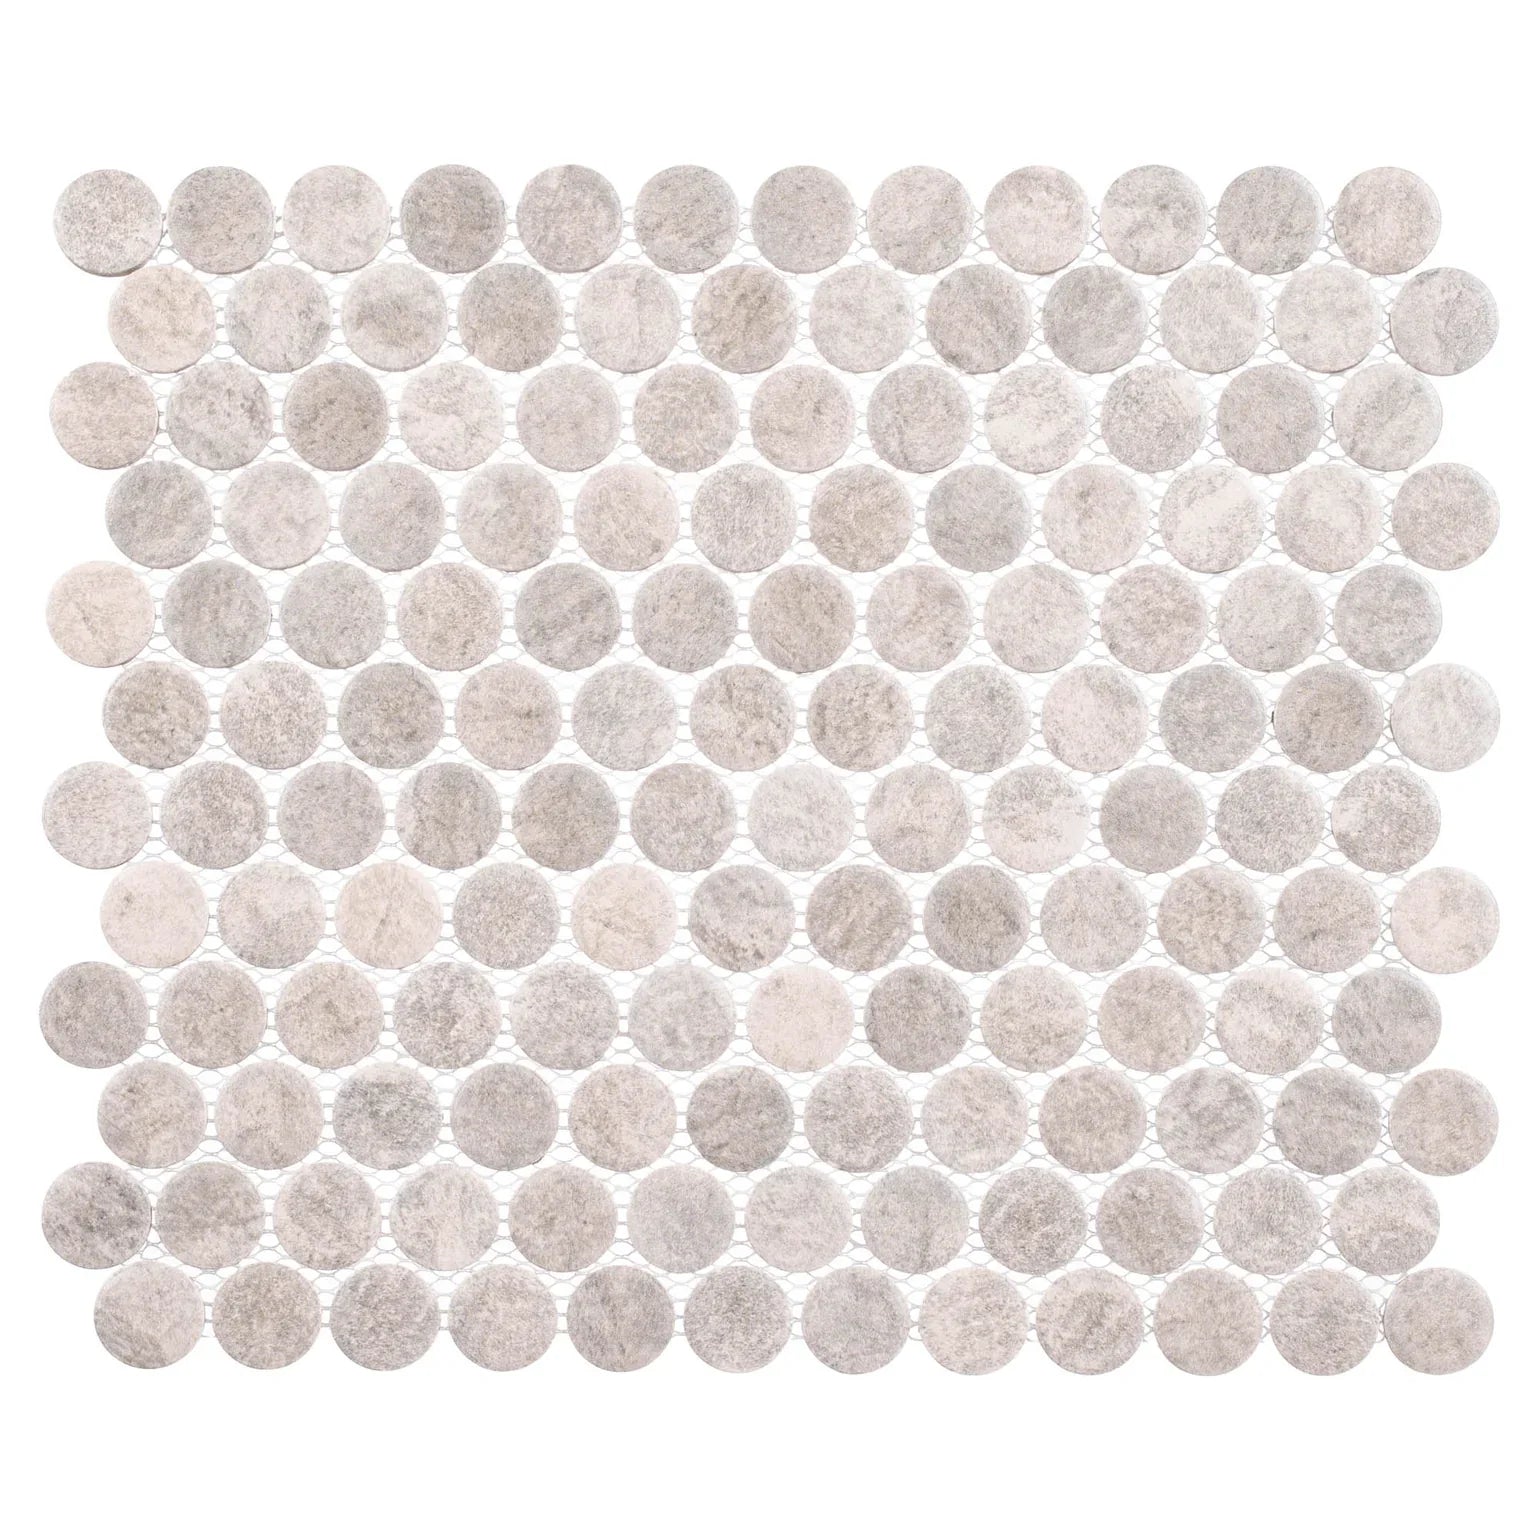 Bellagio - Belworth Collection Porcelain Penny Round Mosaic - Elfan